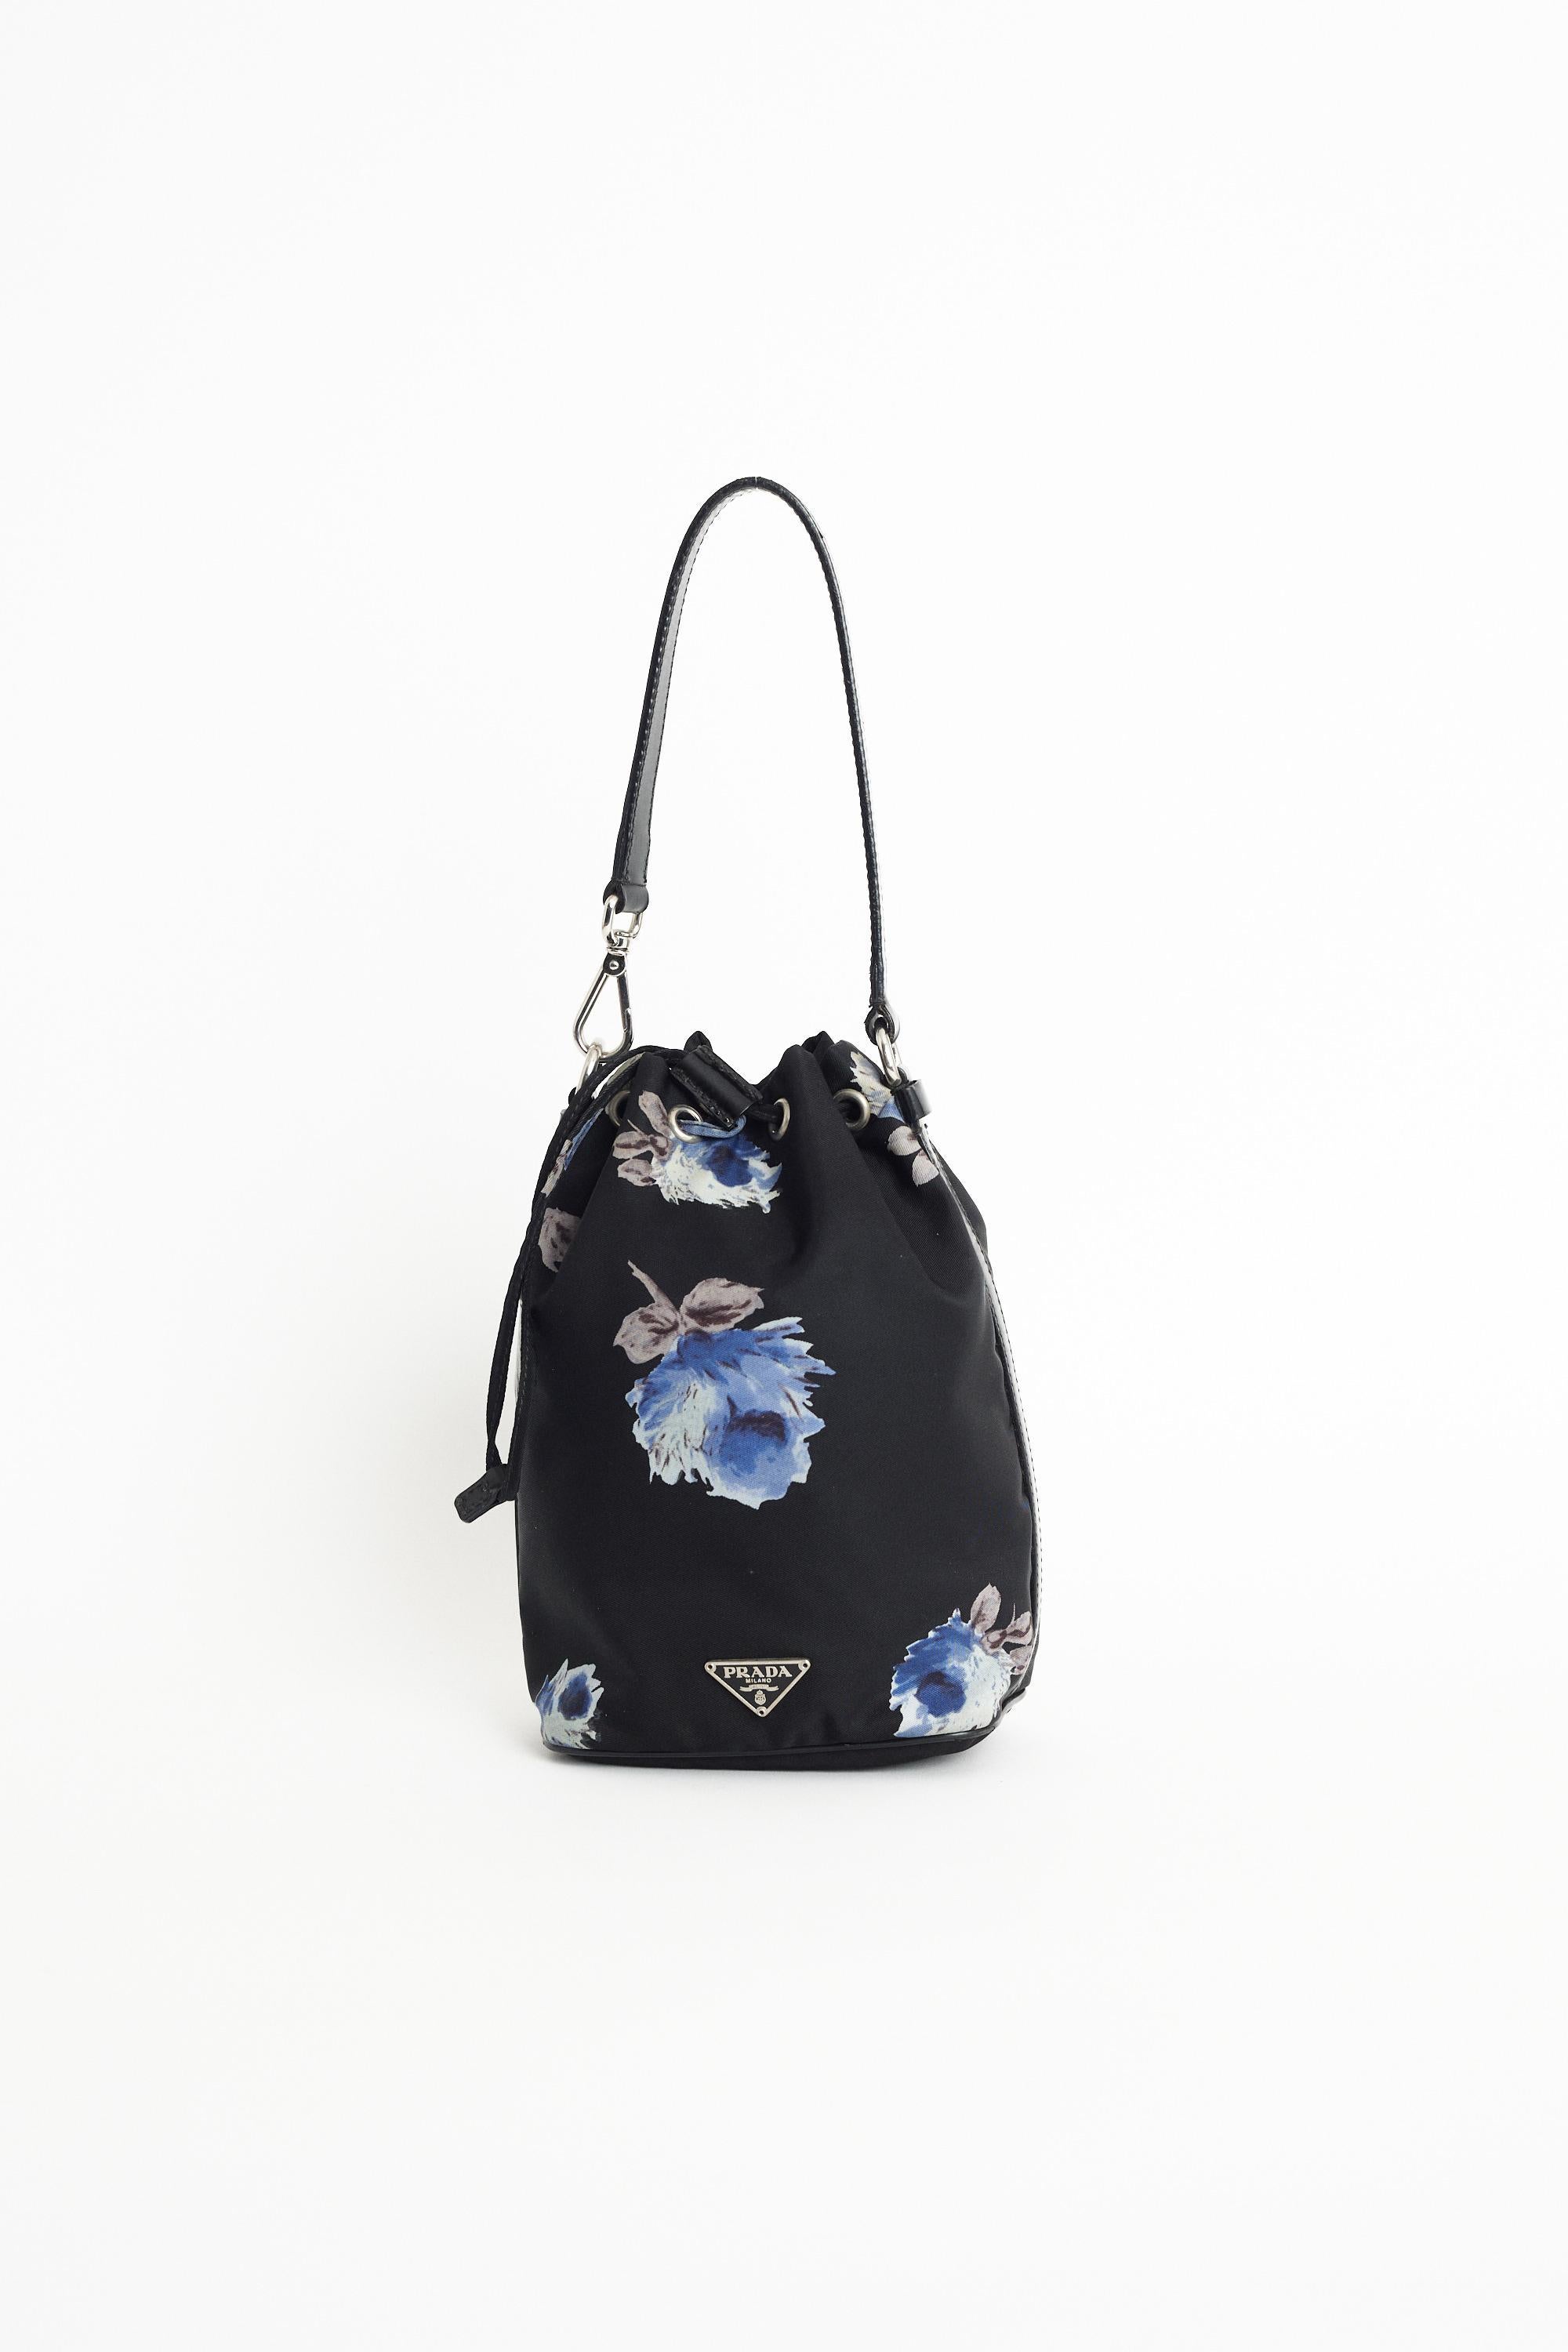 We are very excited to present this Prada rare nylon floral bucket bag. Features soft structure, Prada hardware, removable strap and drawstring closure. Pre-loved, in excellent vintage condition. Authenticity guaranteed.

Fabric: Nylon
Dustbag: